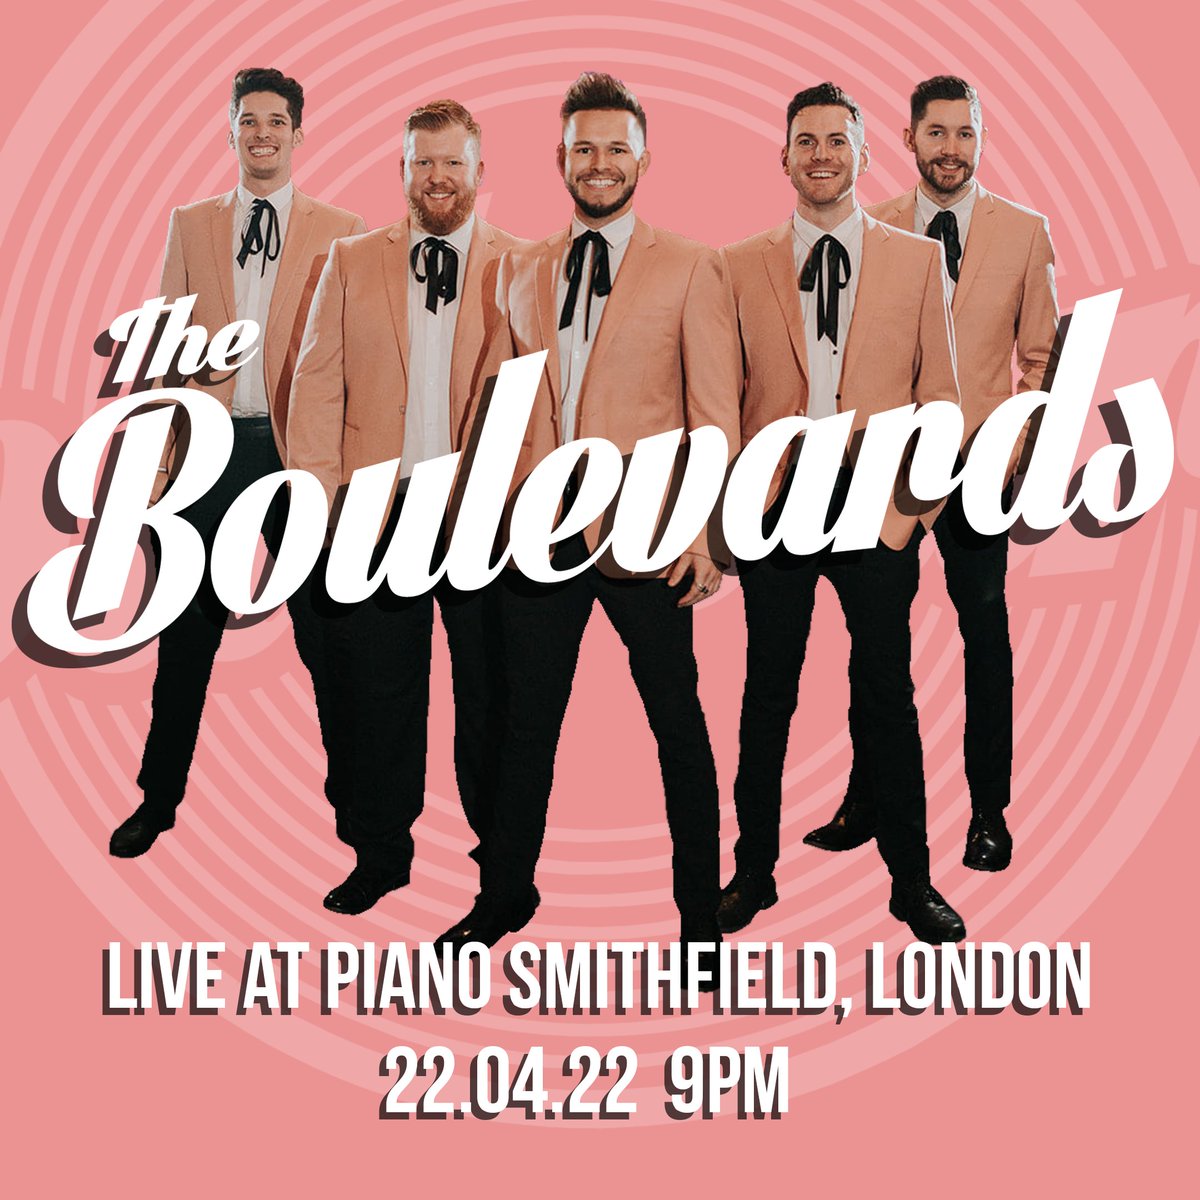 ⚠️ GIG ANNOUNCEMENT! ⚠️
We're delighted to announce this very special public performance at the fantastic @pianosmithfield on April 22nd. It's gonna be a fantastic party night of great 50's rock & roll music, singing and dancing. 
Tickets are available via the link in our bio.